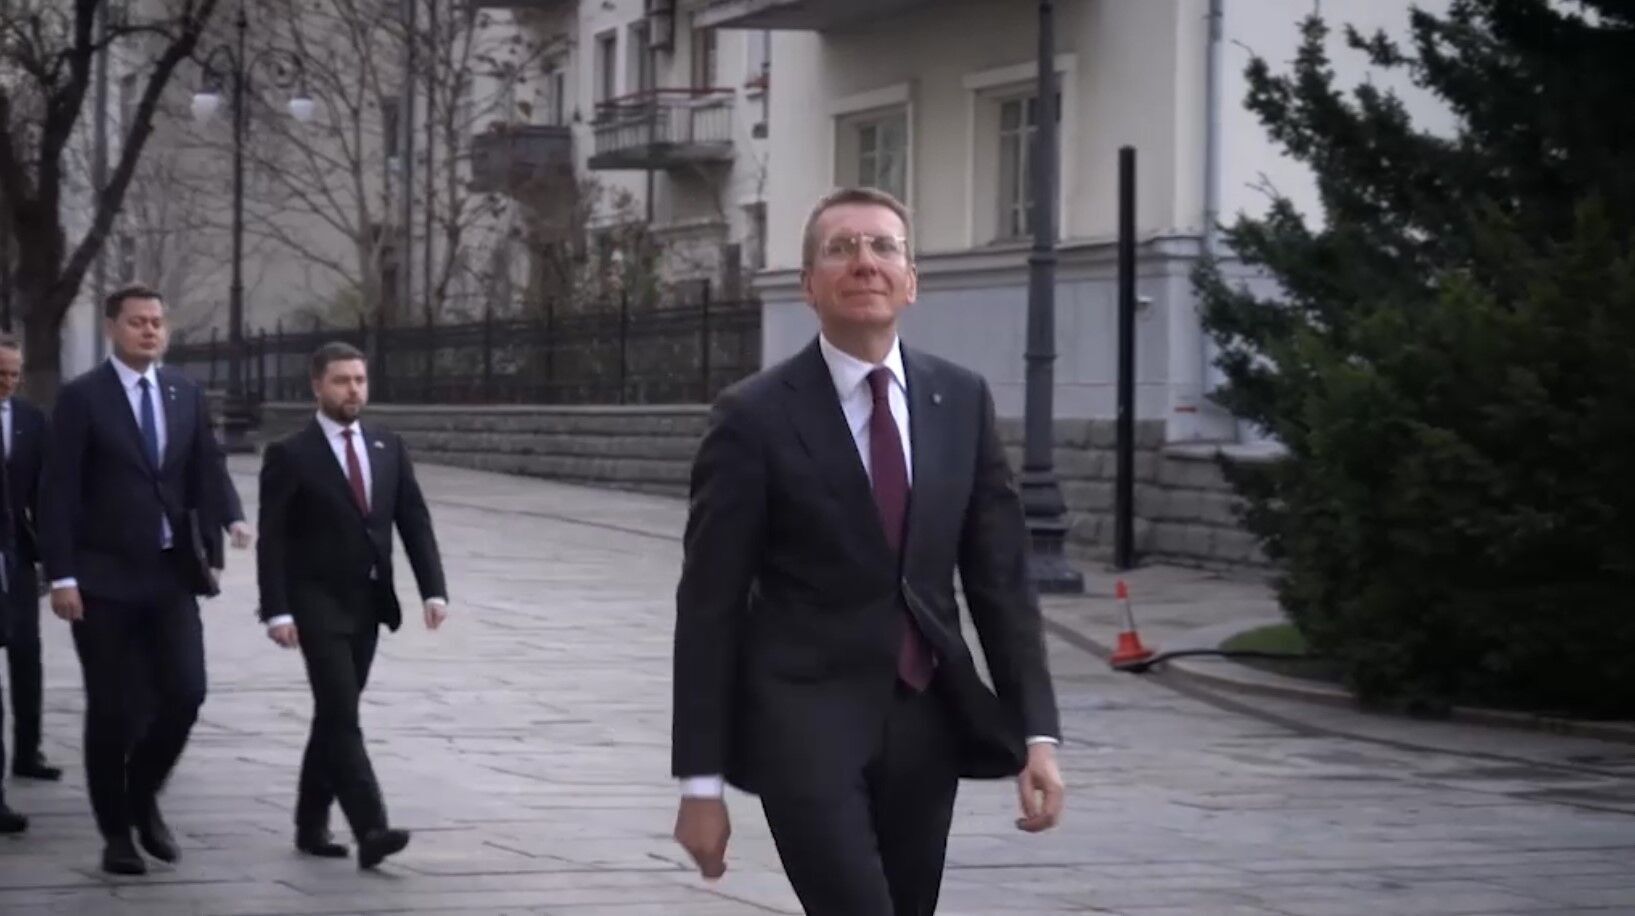 Talked about EU accession and more: Latvian president met with Zelensky in Kiev. Video and details of the talks